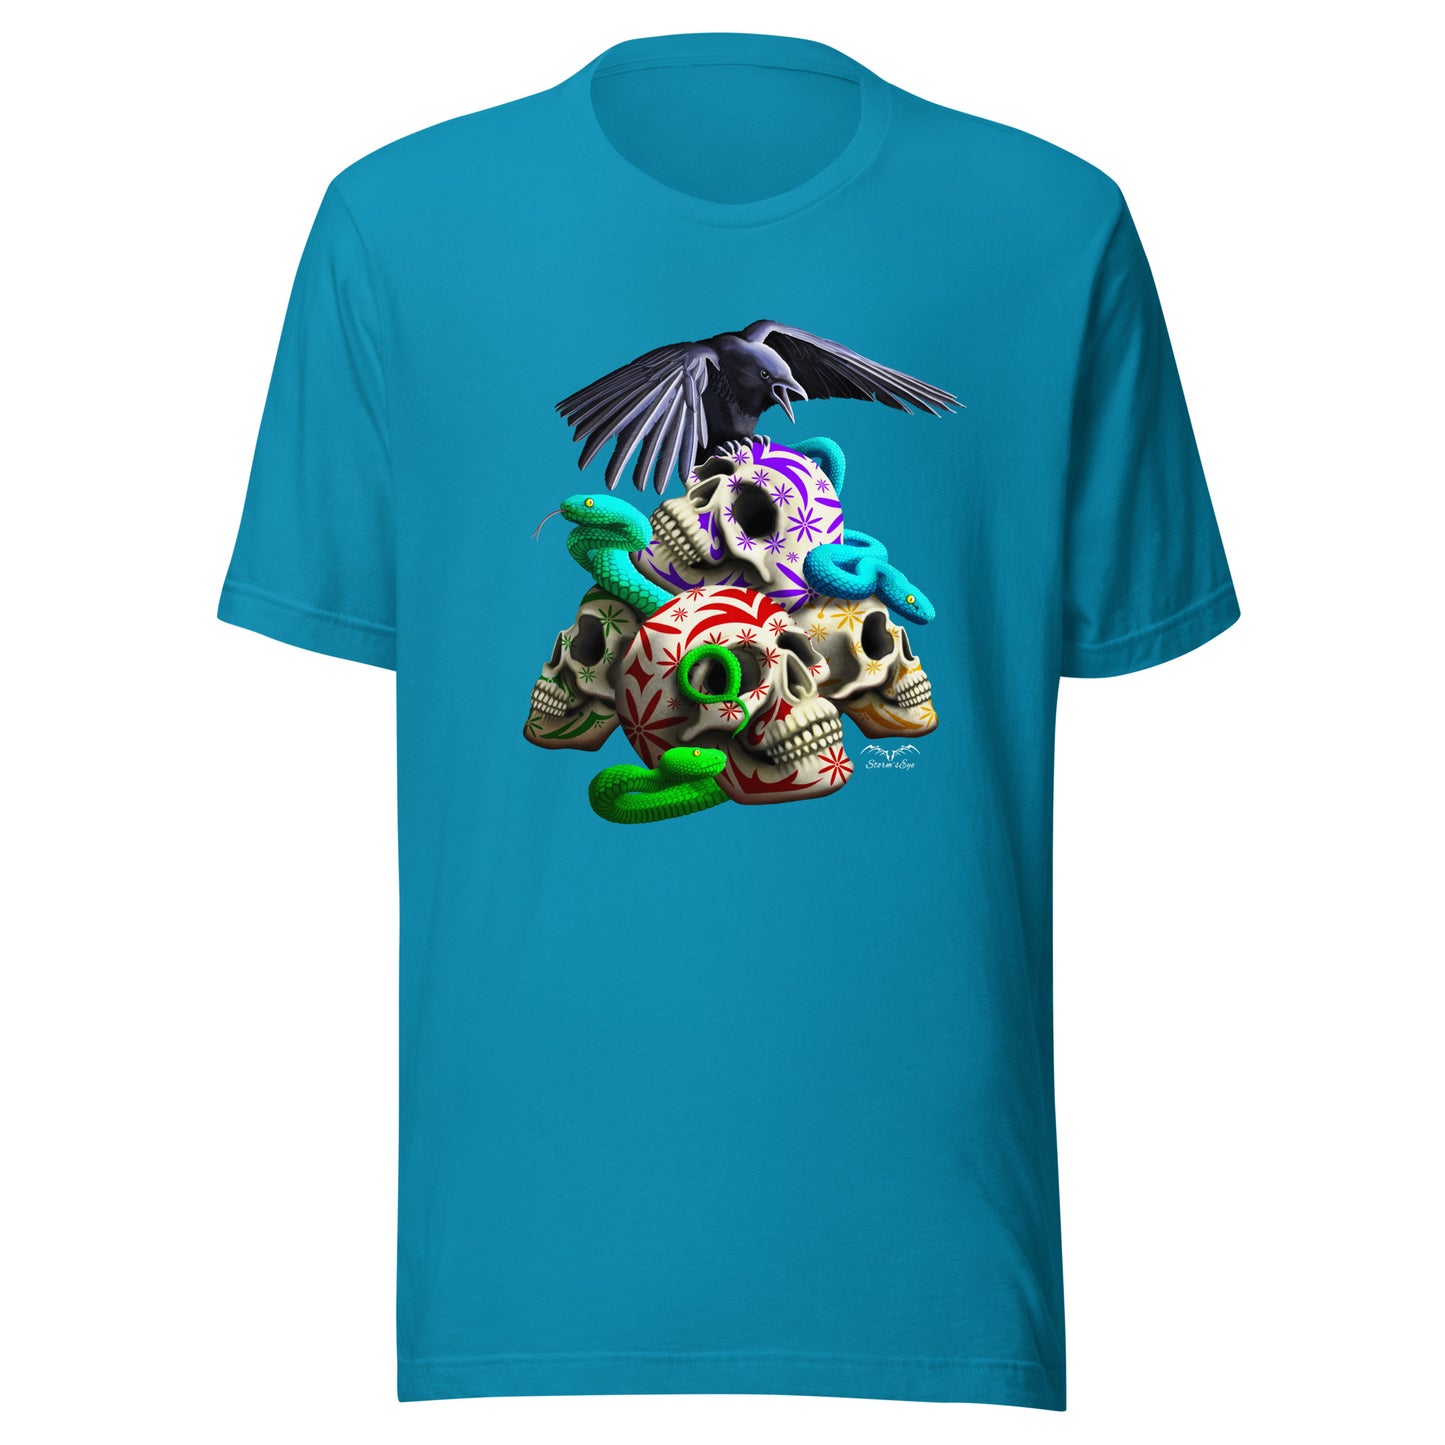 stormseye design gothic sugar skulls and snakes T shirt flat view bright blue